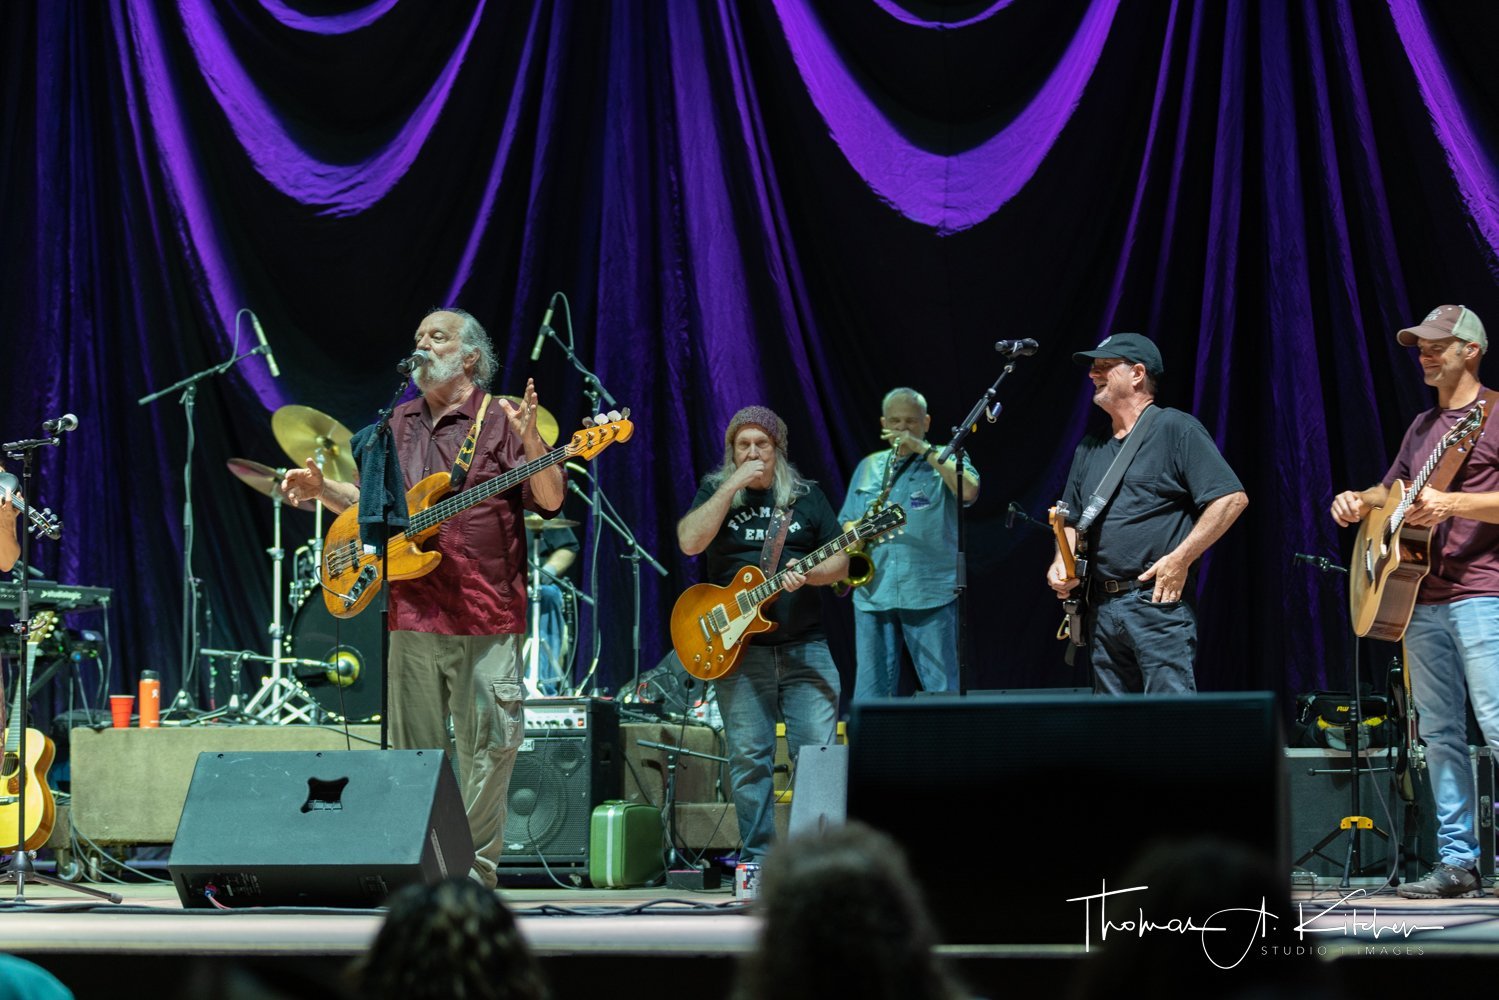 The Ozark Mountain Daredevils were hit with COVID ahead of the weekend gigs. Michael “Supe” Granda, of St. Louis, stepped in to fill the gaps. Pictured left to right are Supe, Greg Martin of the Kentucky Headhunters, Dave Painter and Jeremy Montgomery during the show’s encore.